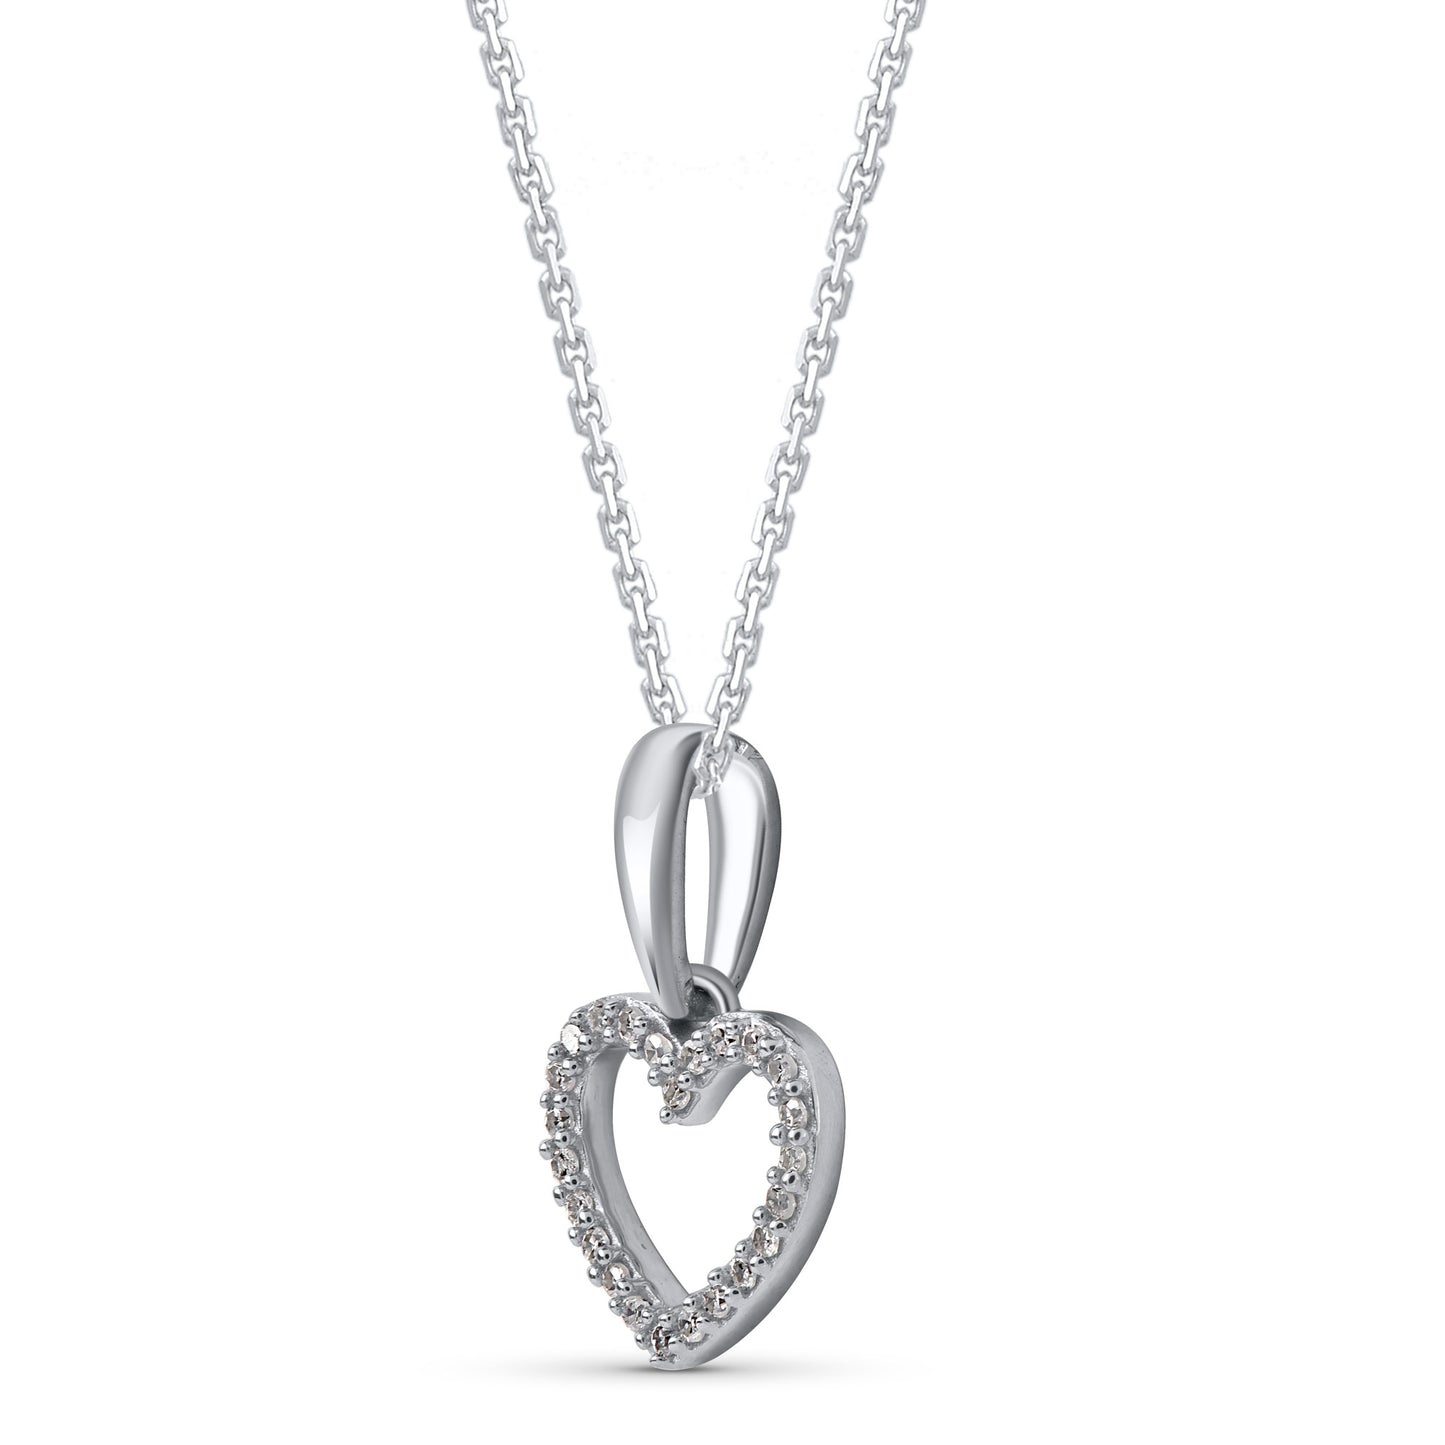 Classic Heart Pendant Necklace in 925 Sterling Silver